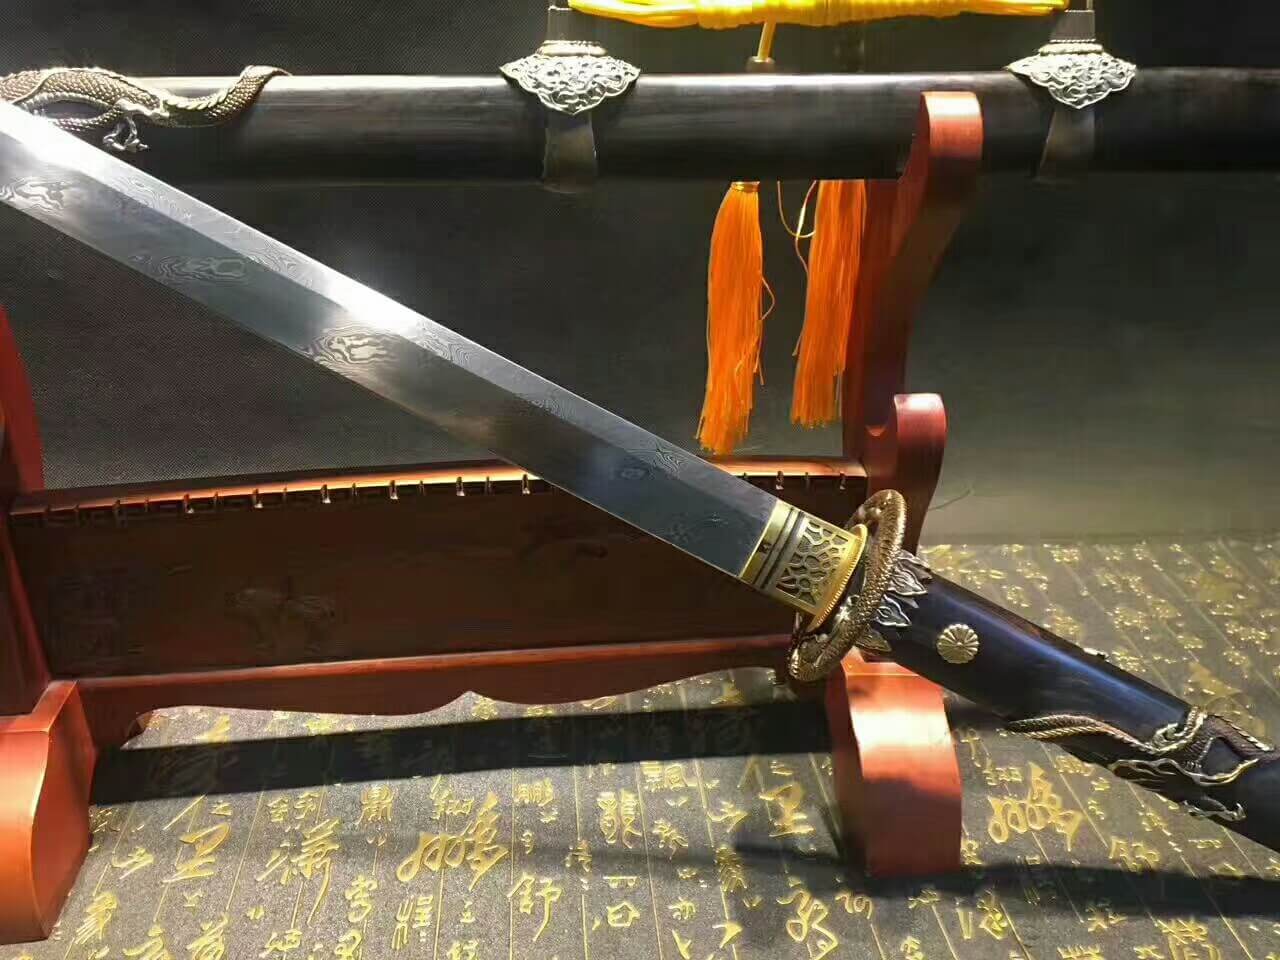 Tang dao(Damascus steel bade,Ebony scabbard,Brass fittings)Full tang,Length 45" - Chinese sword shop